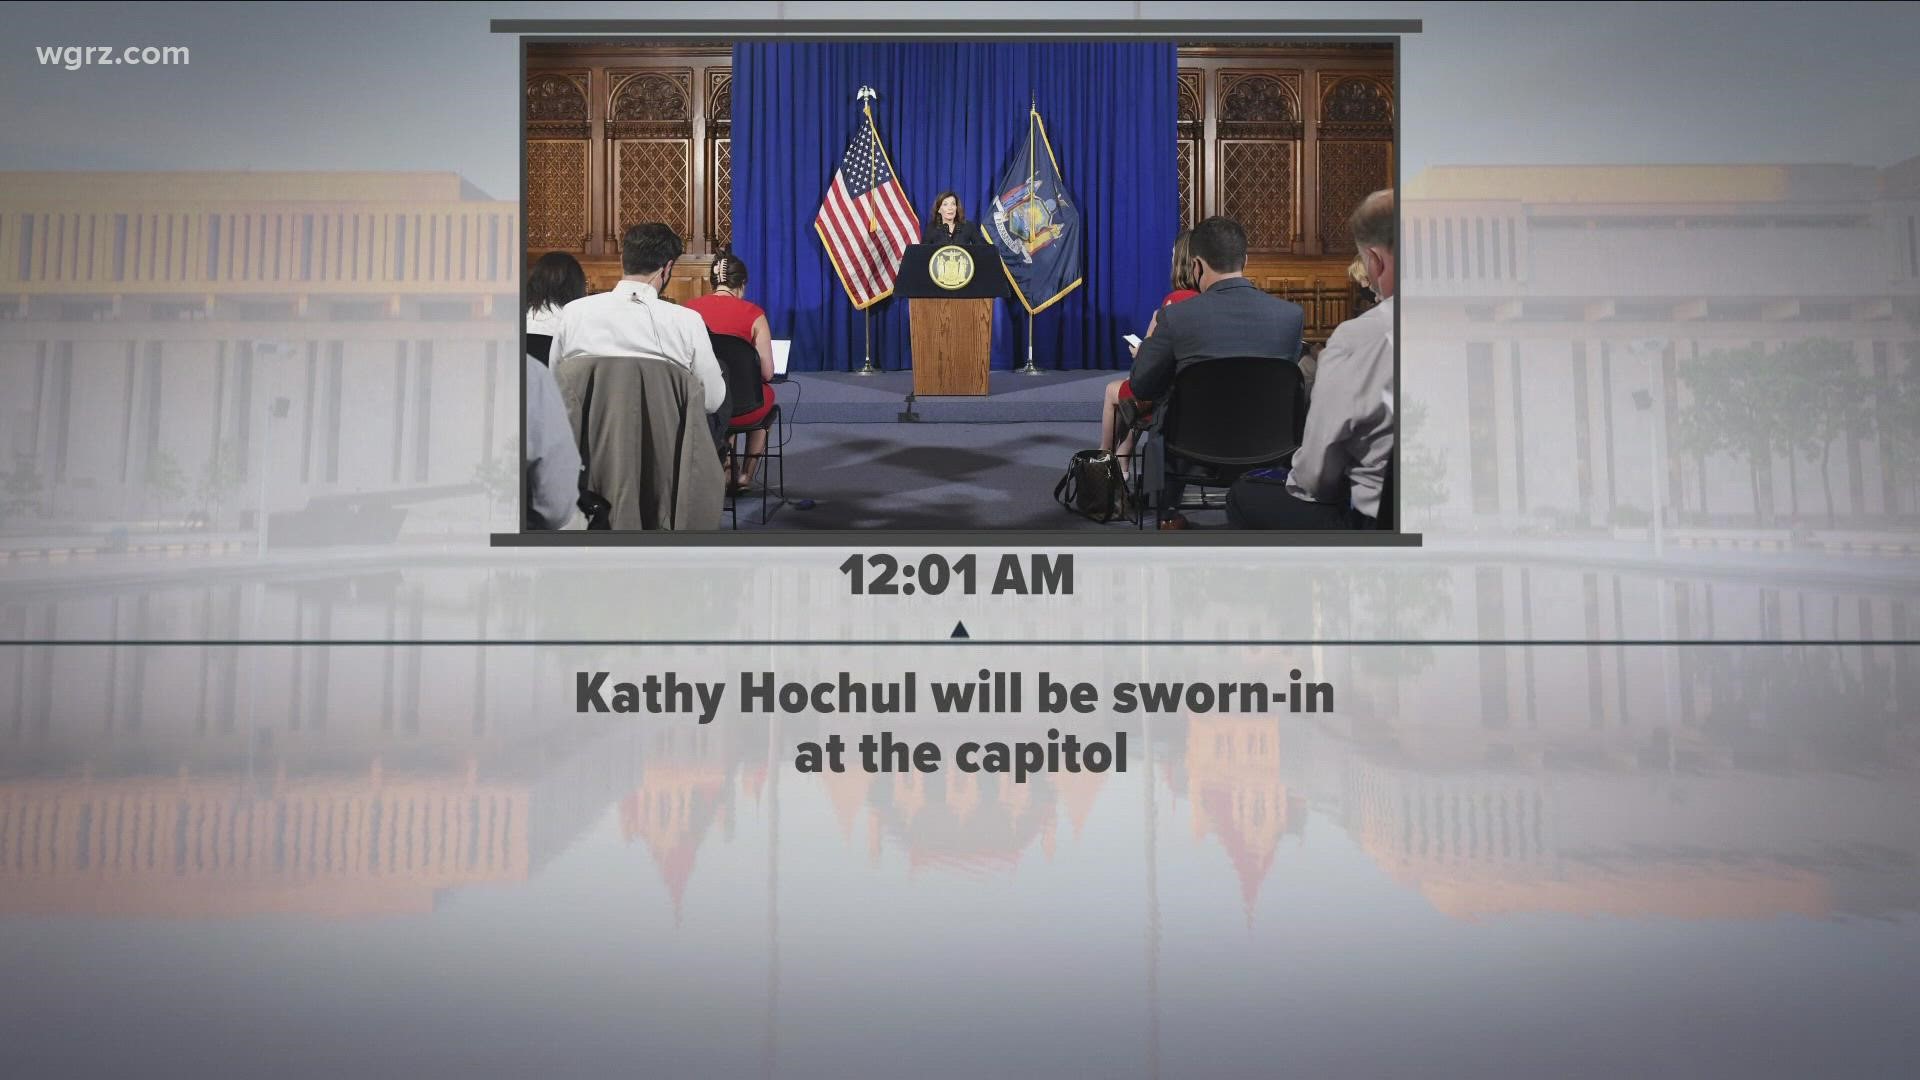 She'll be taking the oath of office at midnight, as current Governor Andrew Cuomo's resignation becomes official